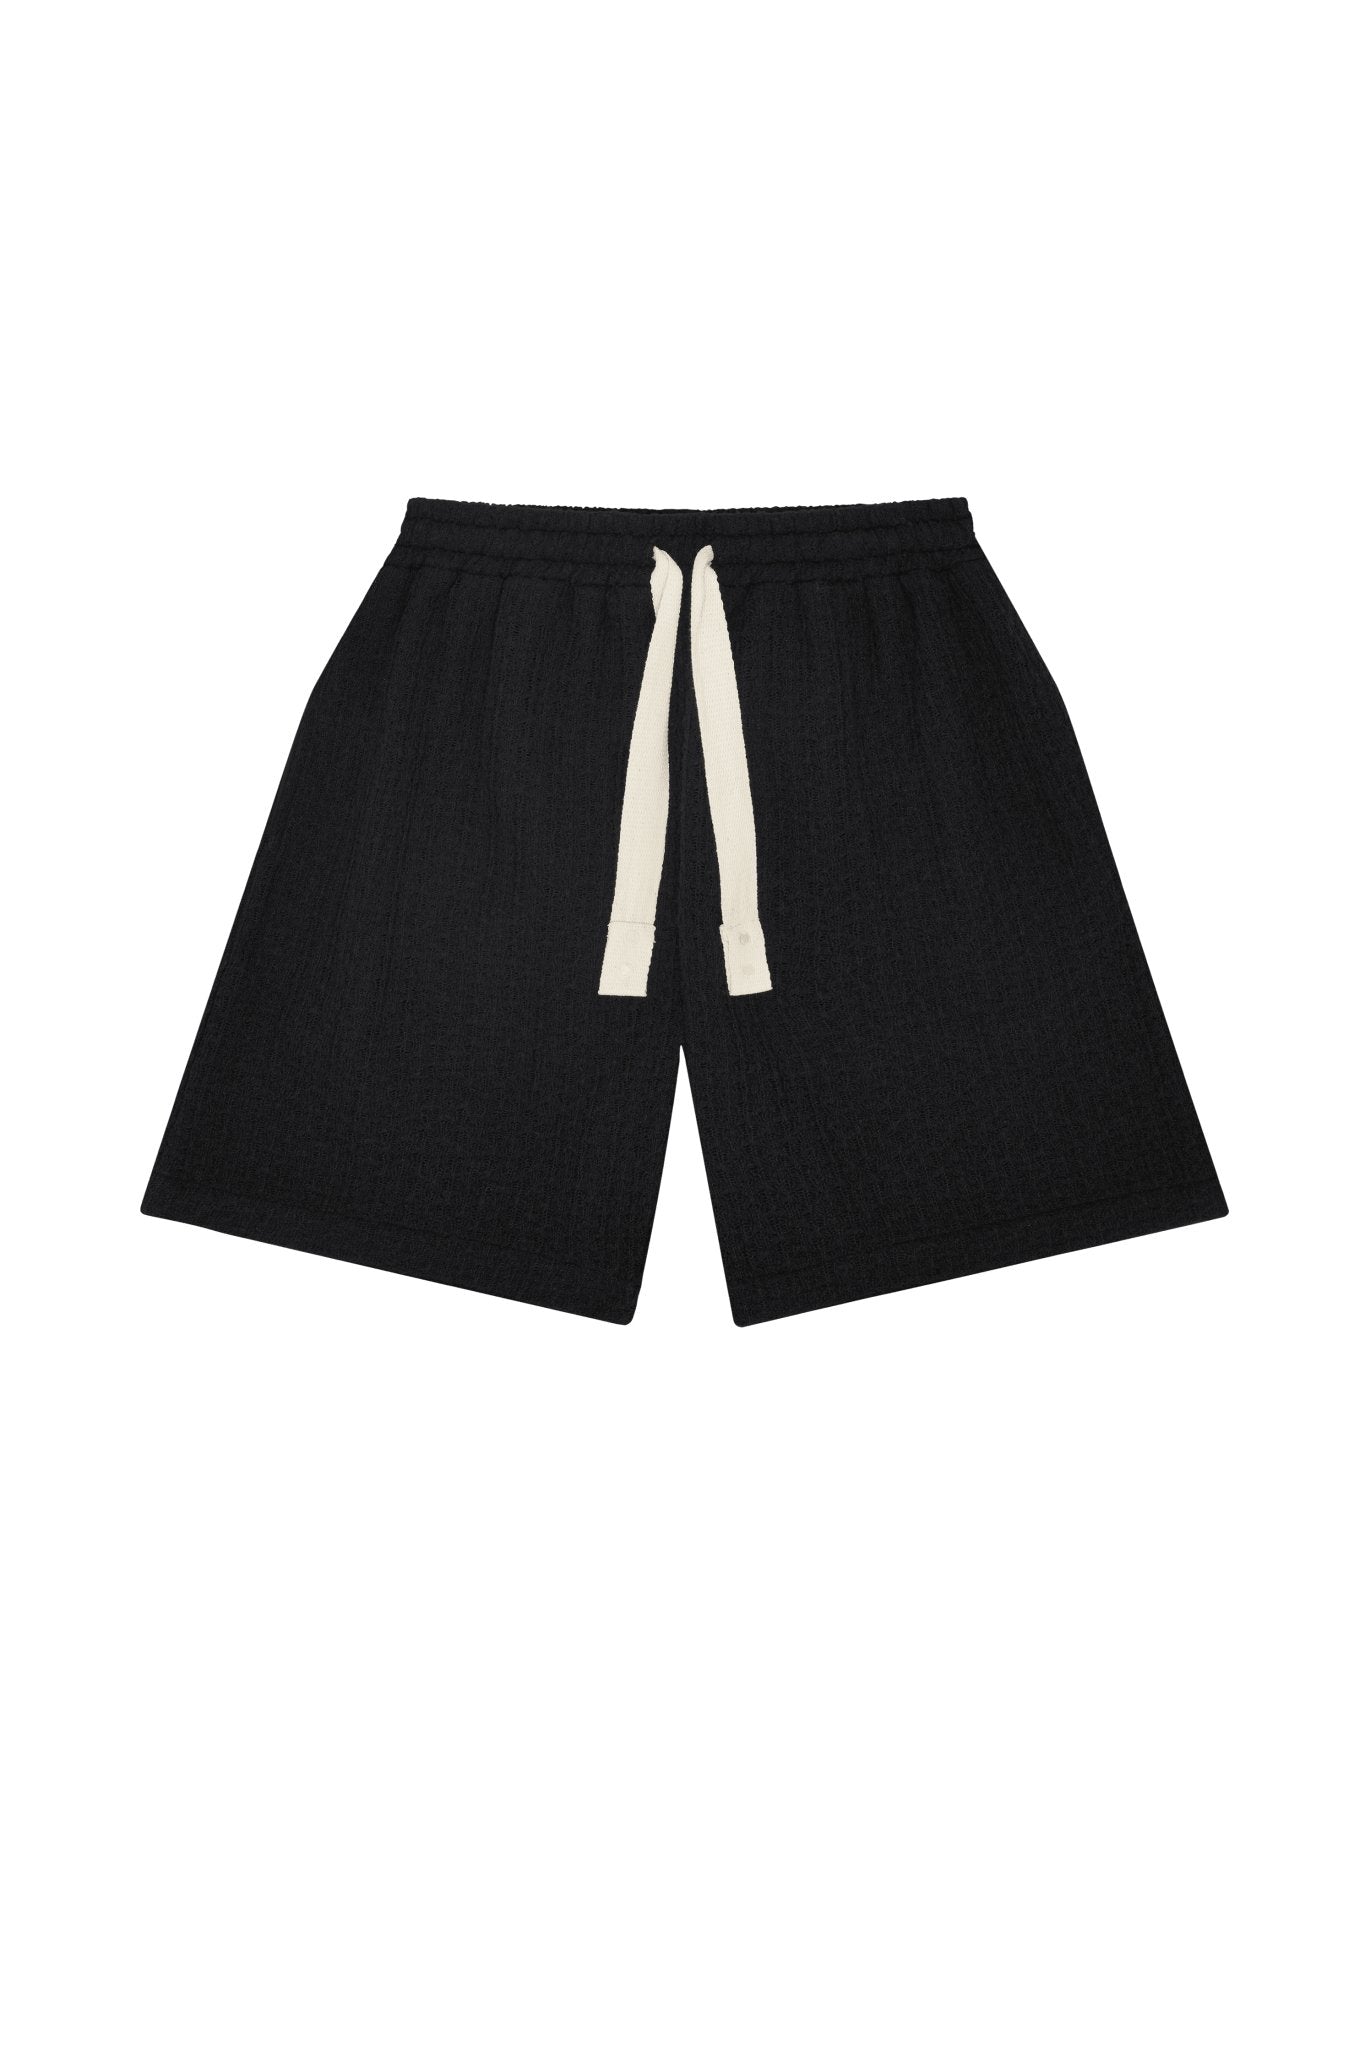 about---blank.comknitted shorts black